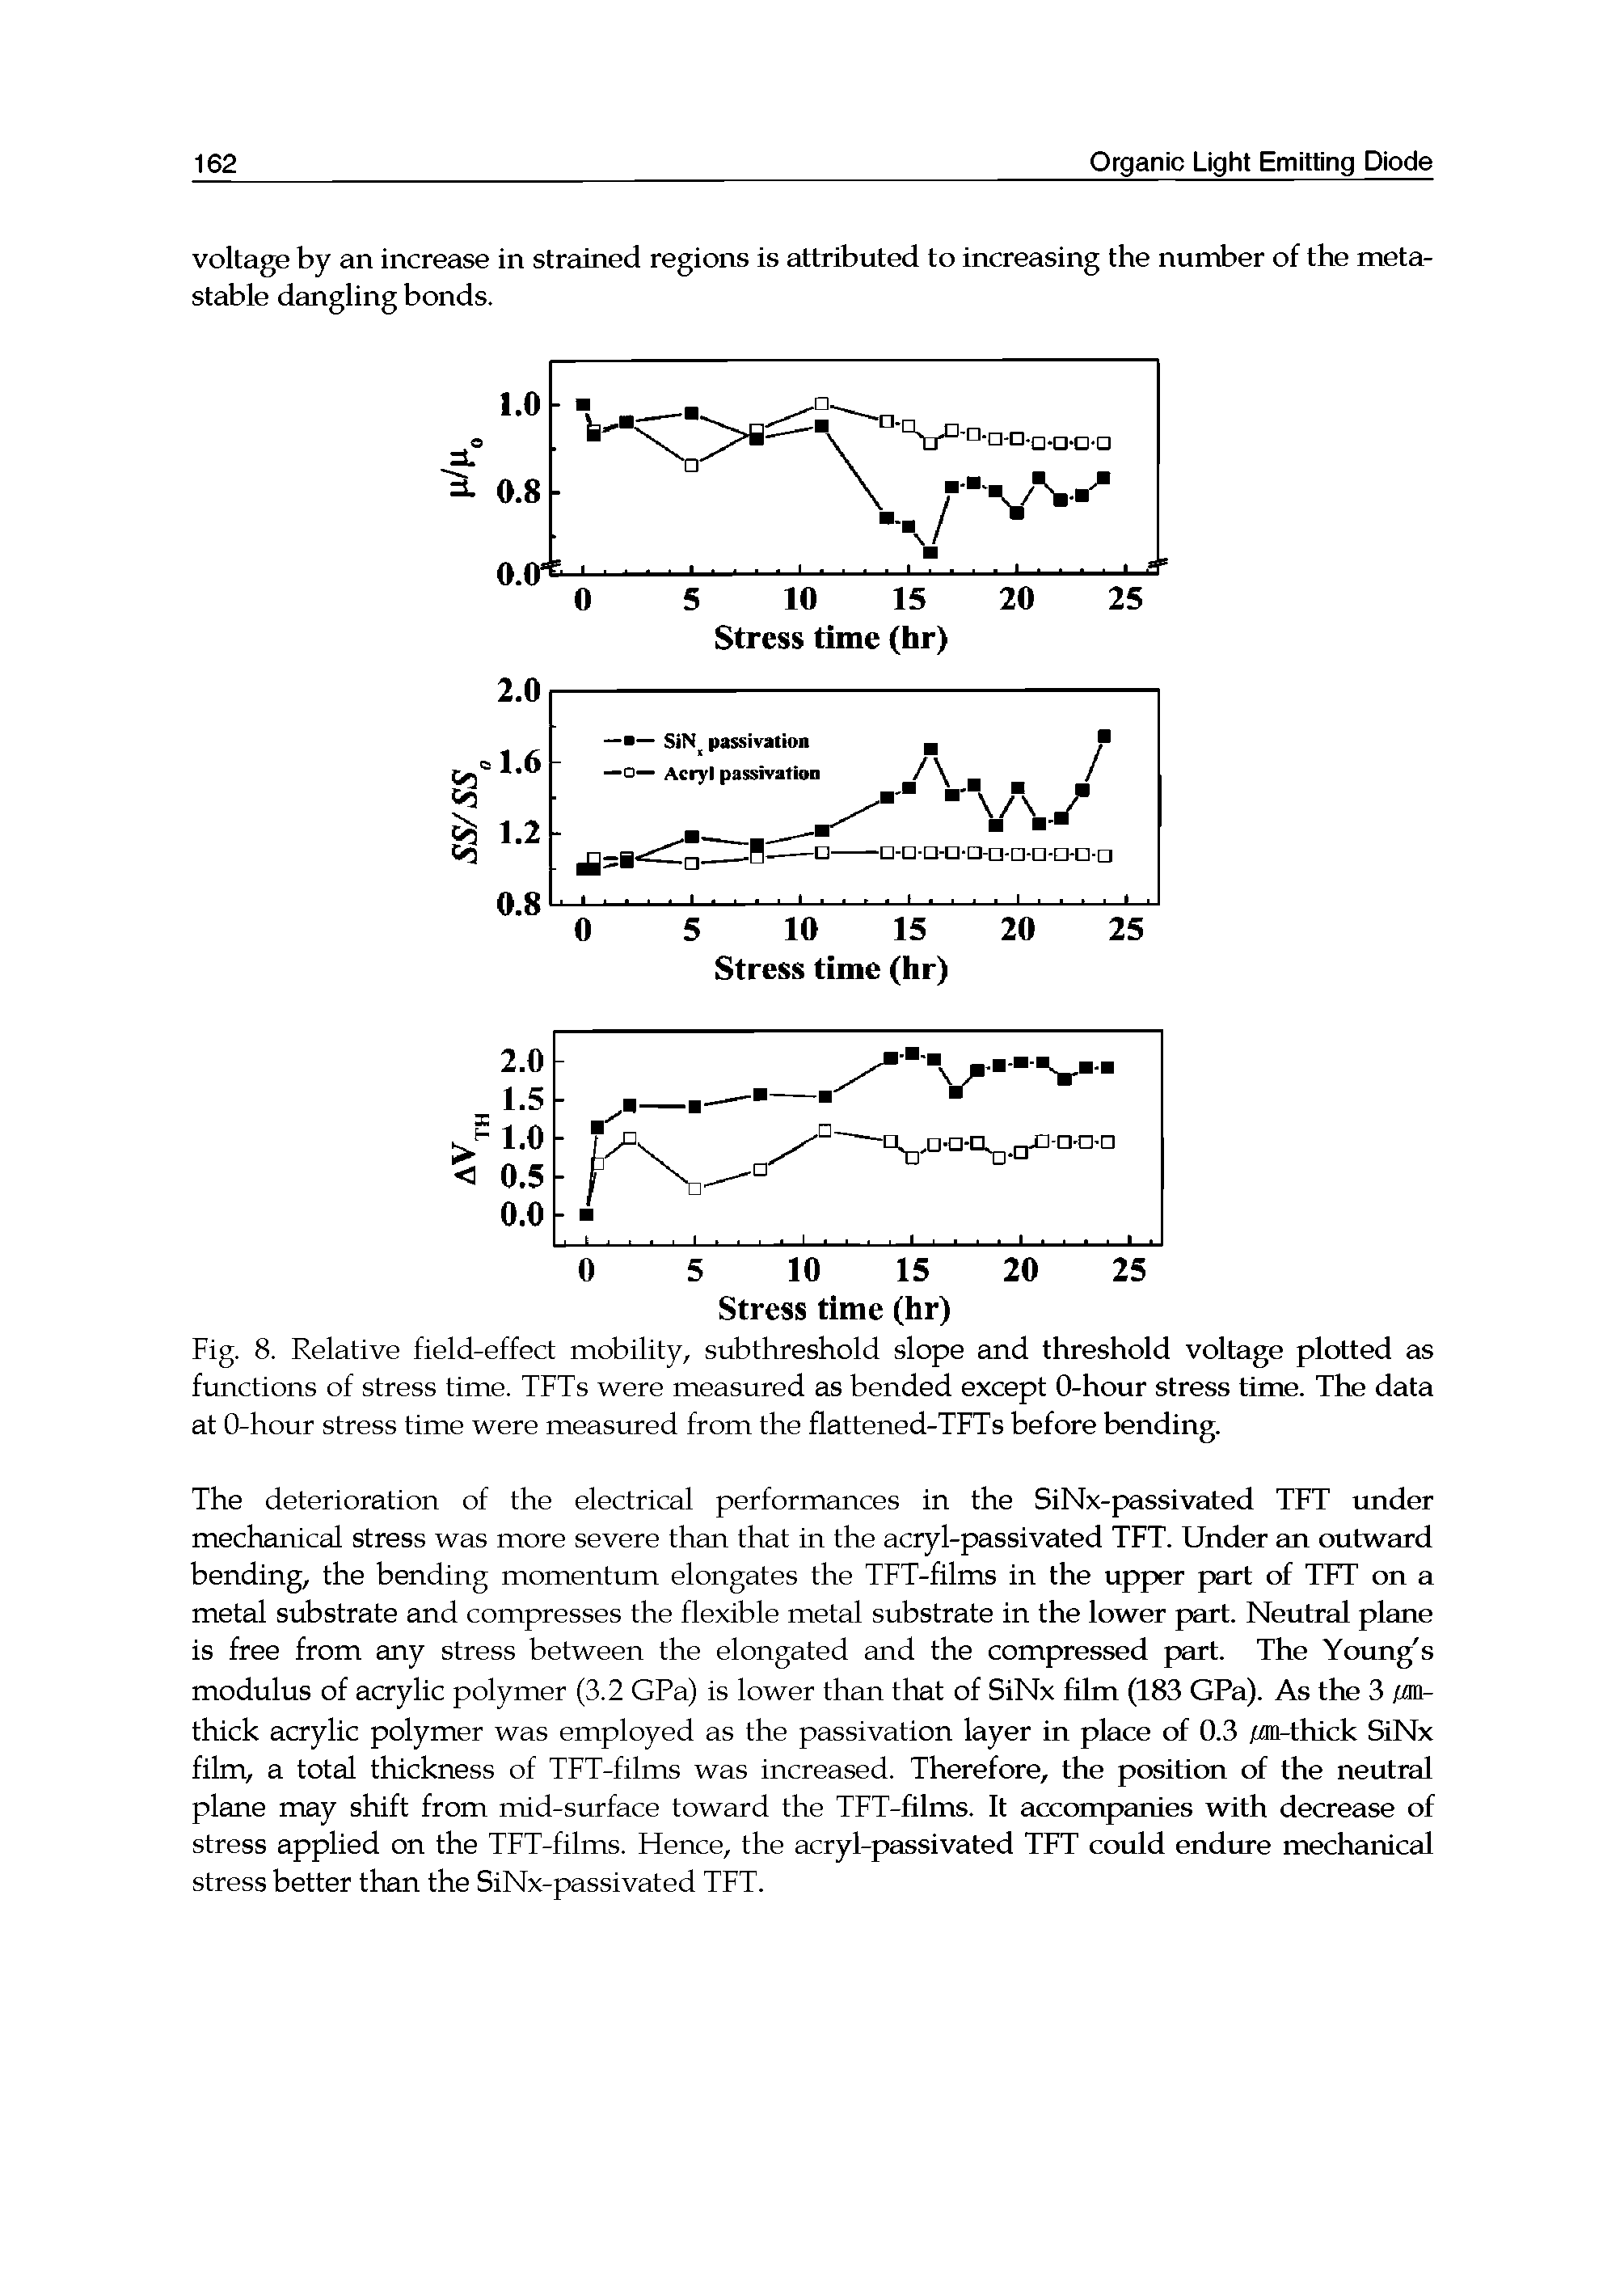 Fig. 8. Relative field-effect mobility, subthreshold slope and threshold voltage plotted as functions of stress time. TFTs were measured as bended except 0-hour stress time. The data at 0-hour stress time were measured from the flattened-TFTs before bending.